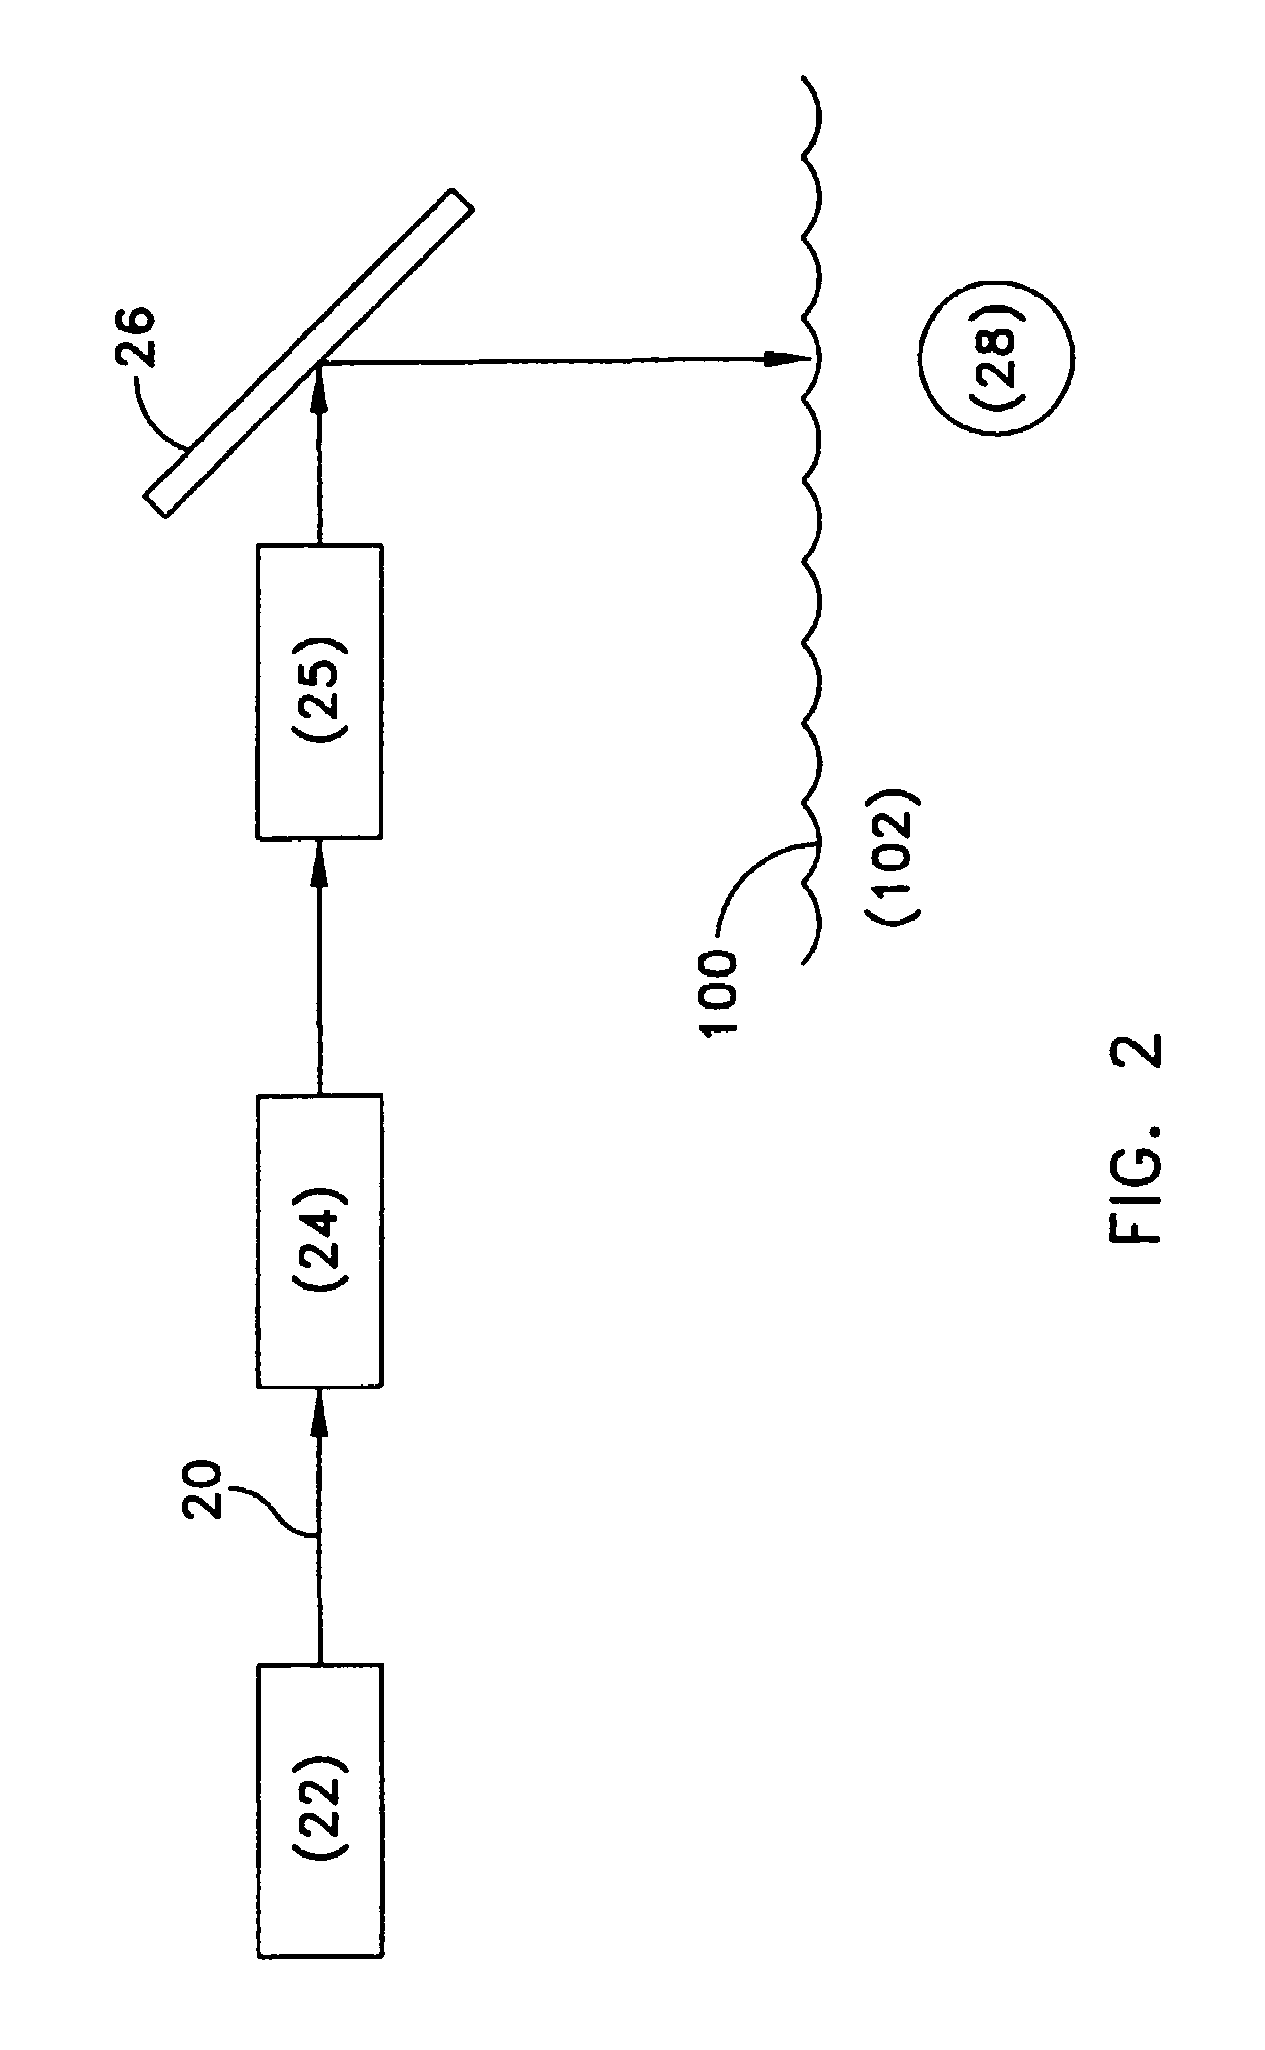 Method for linear optoacoustic communication and optimization